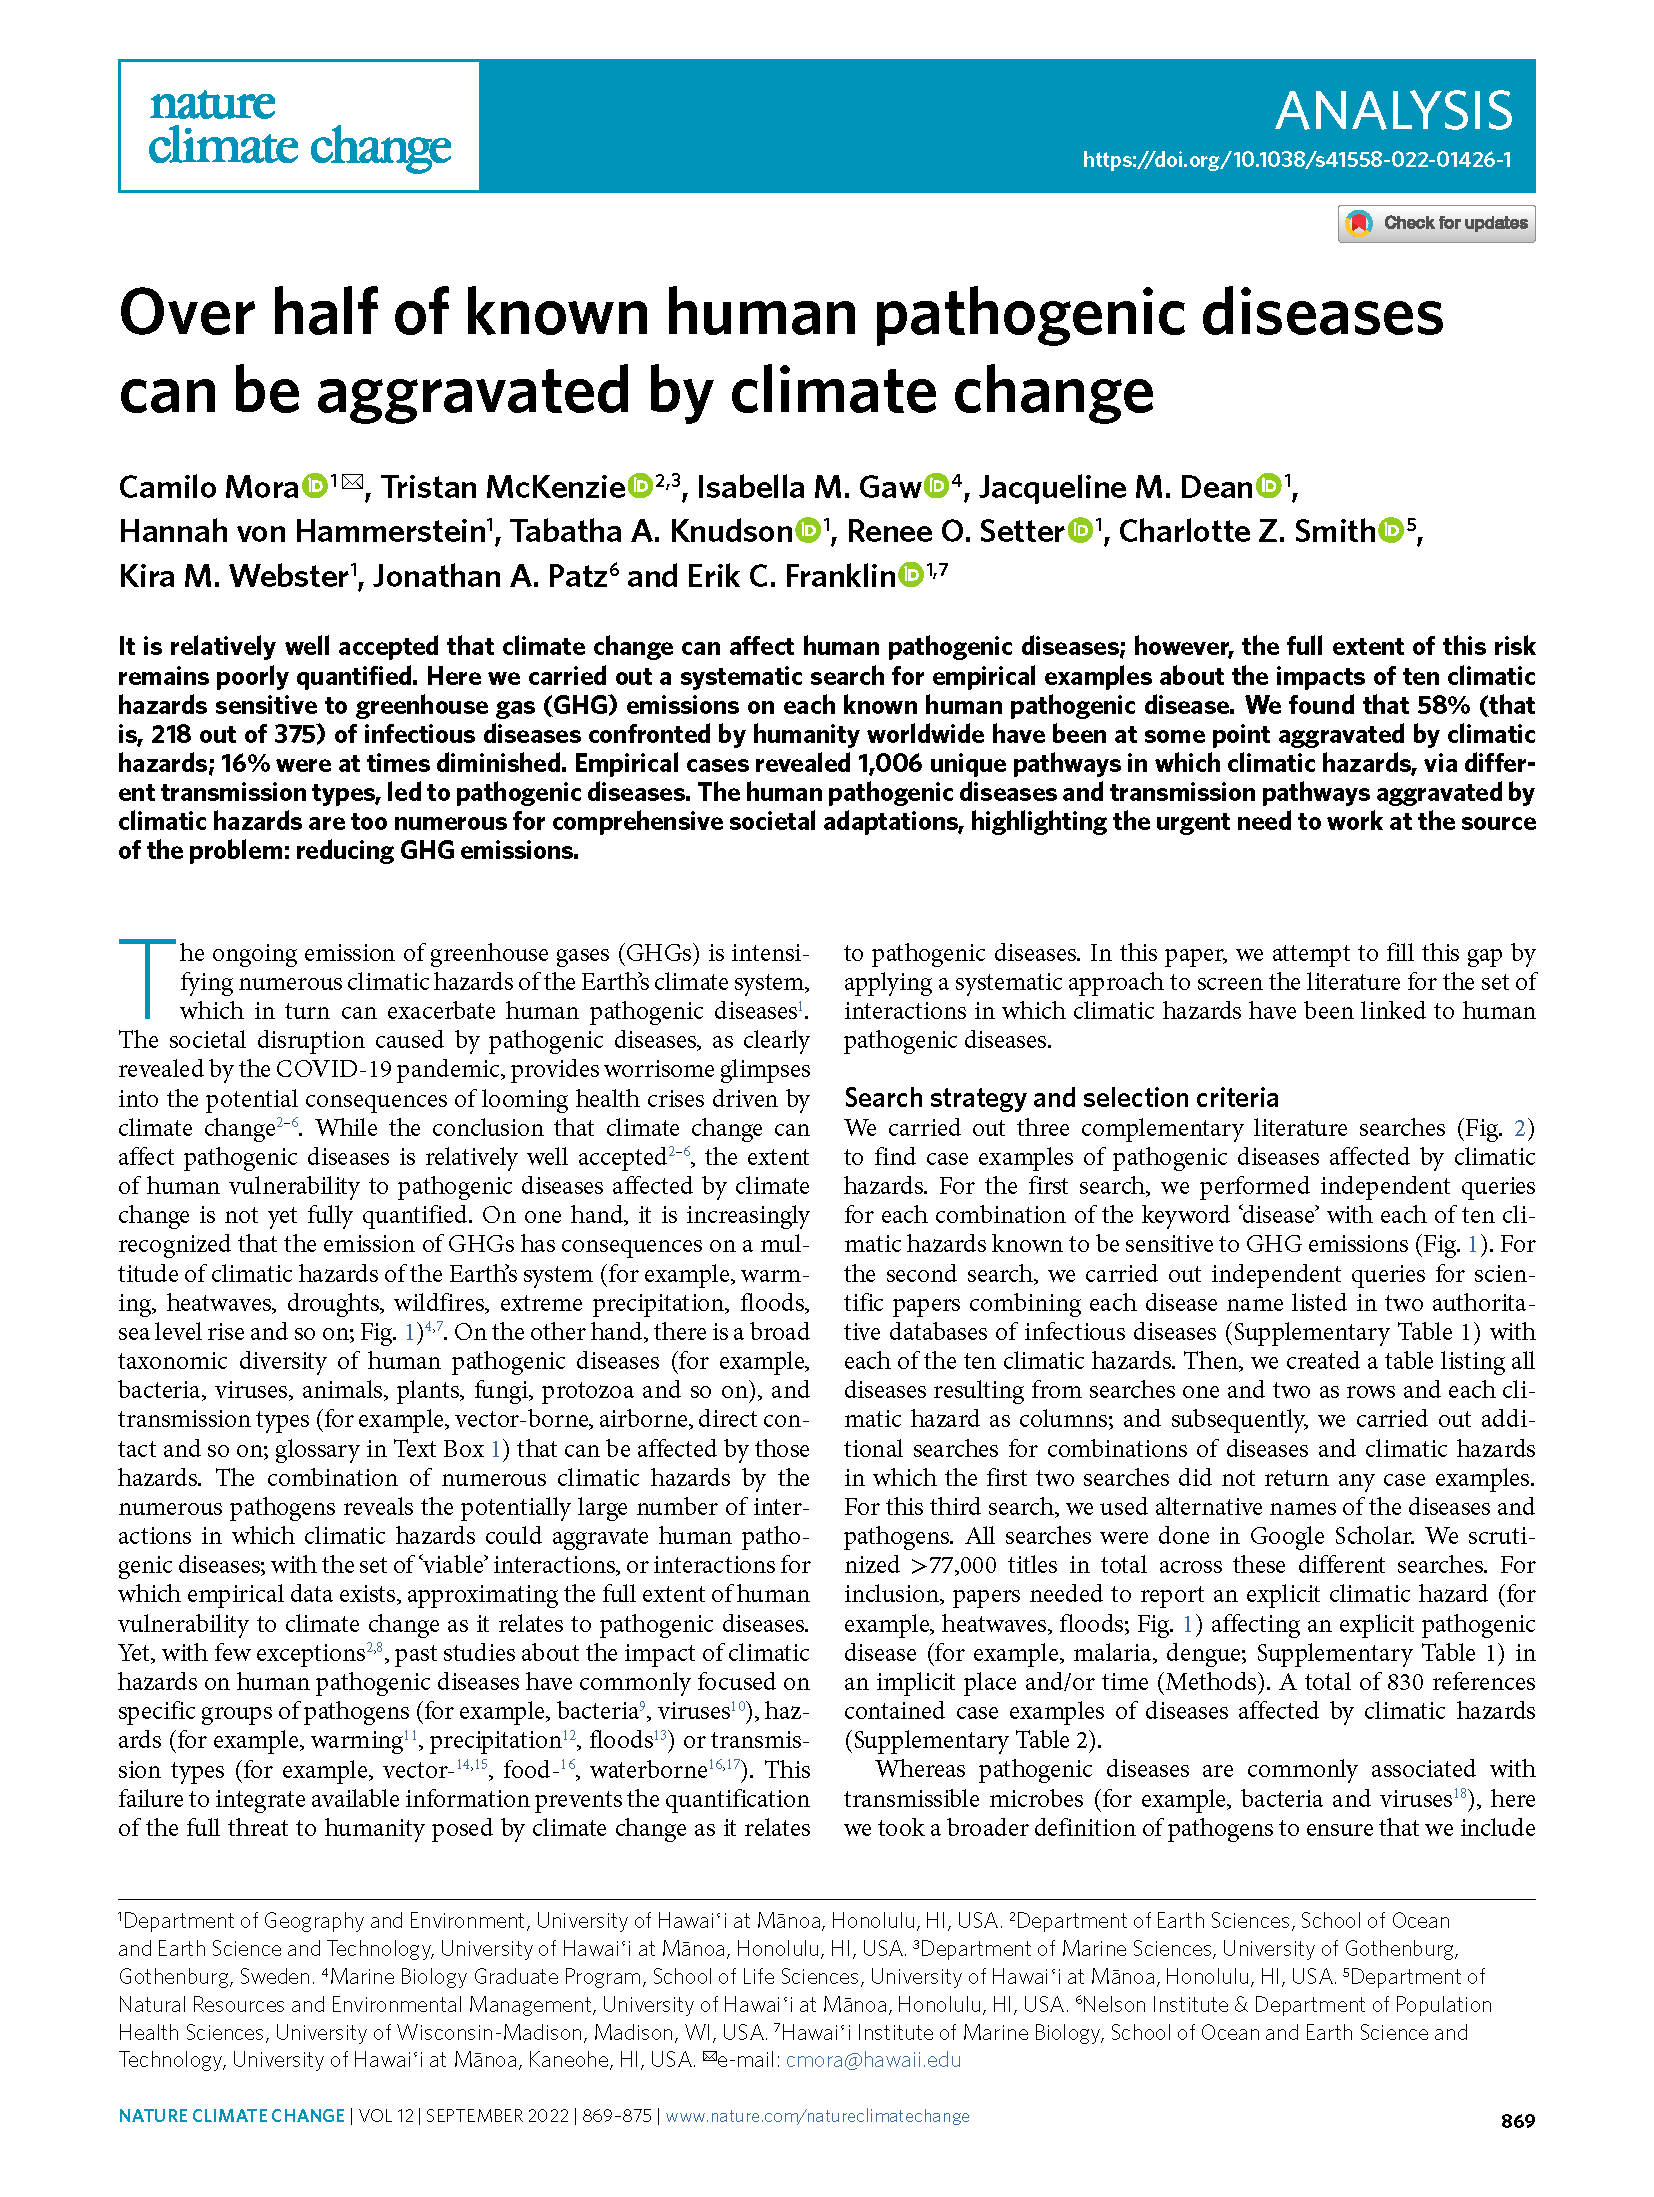 Cover page for Over Half of Known Human Pathogenic Diseases can be Aggravated by Climate Change